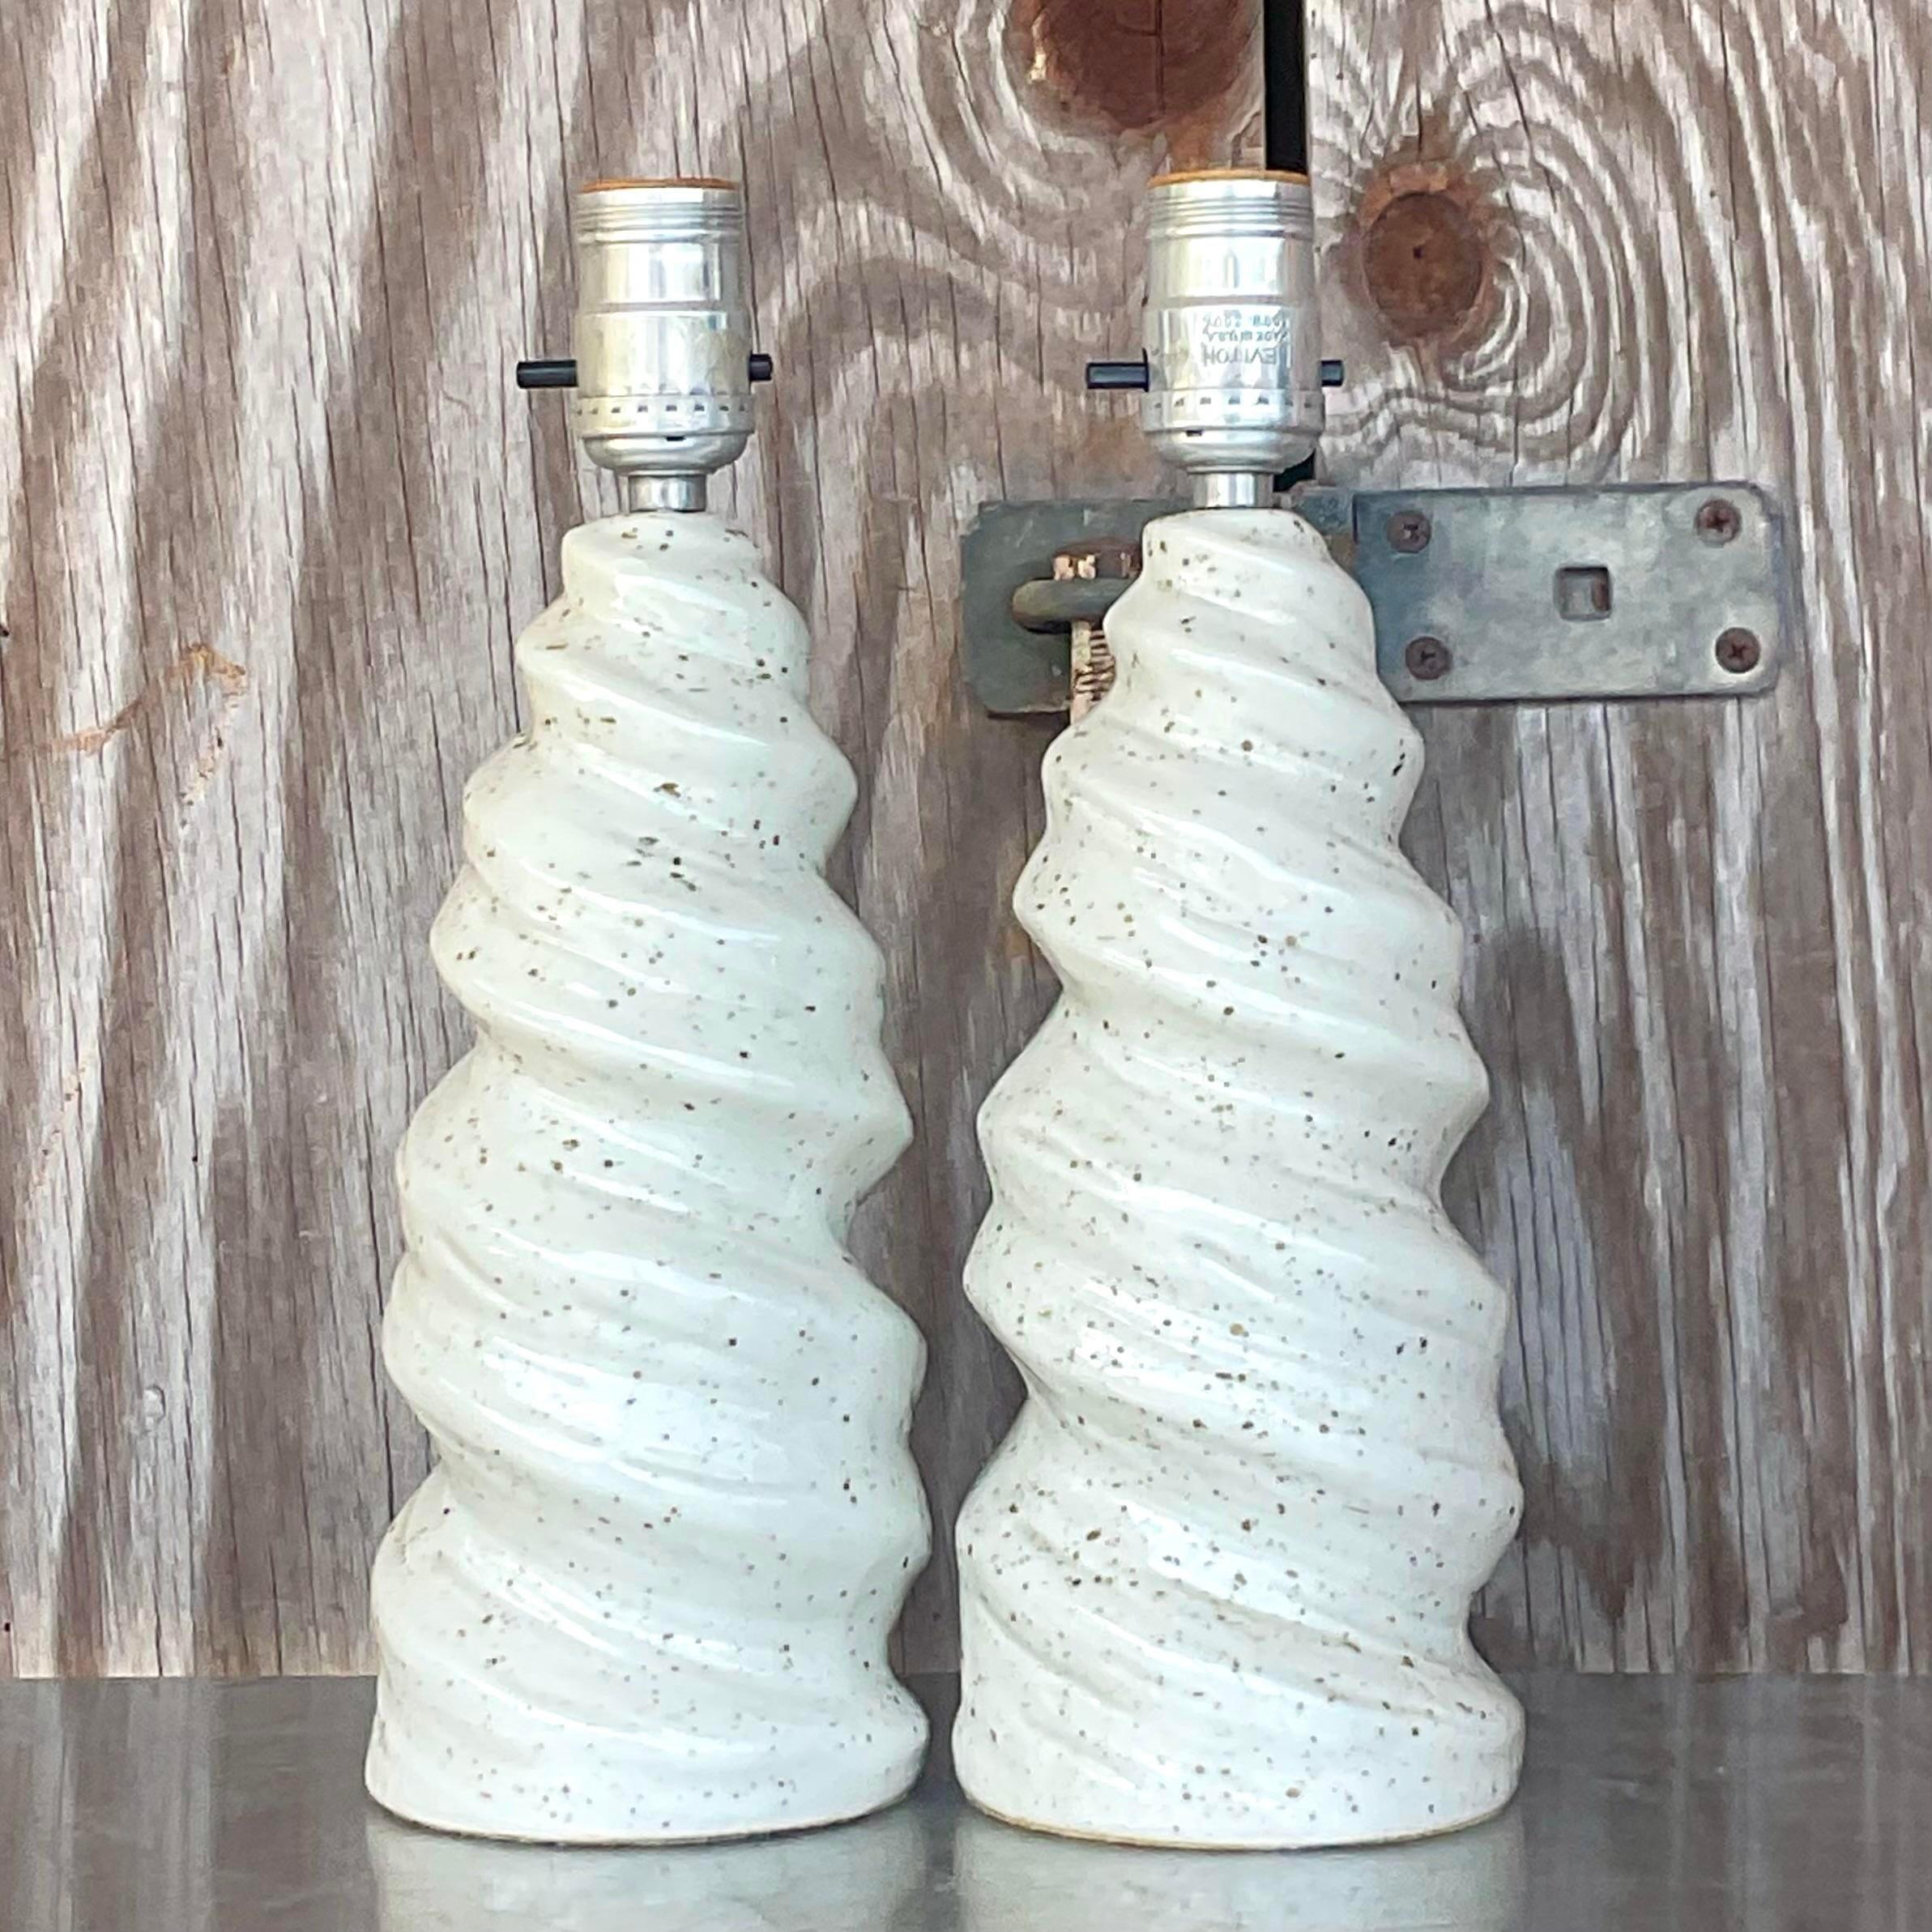 American Vintage Glazed Ceramic Twist Table Lamps - a Pair For Sale